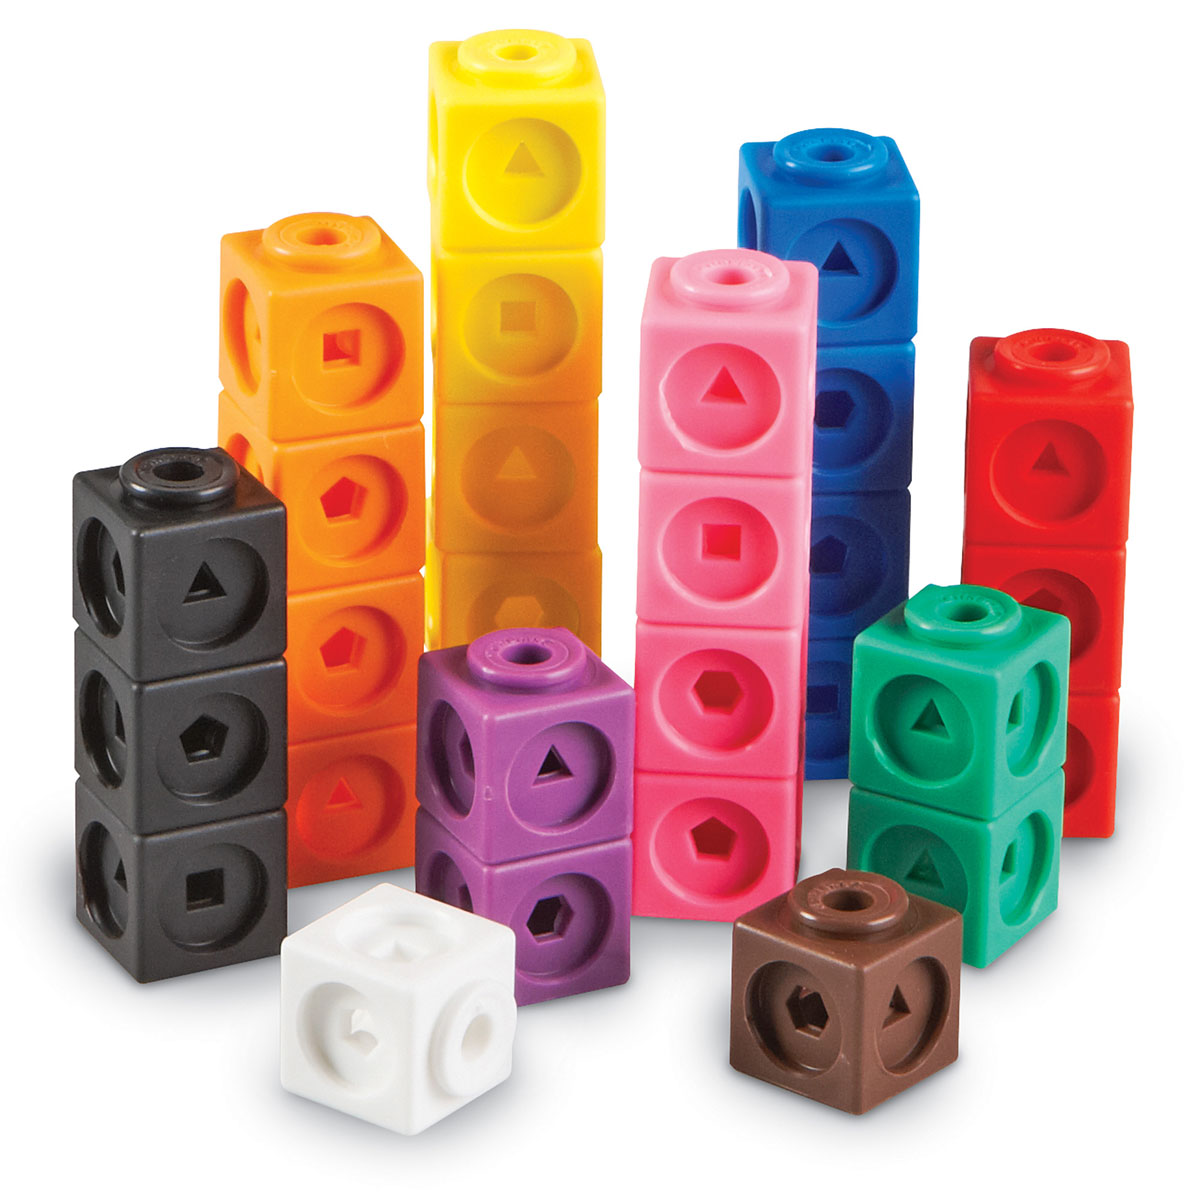 MathLink Cubes - Set of 100 - by Learning Resources LER4285 | Primary ICT